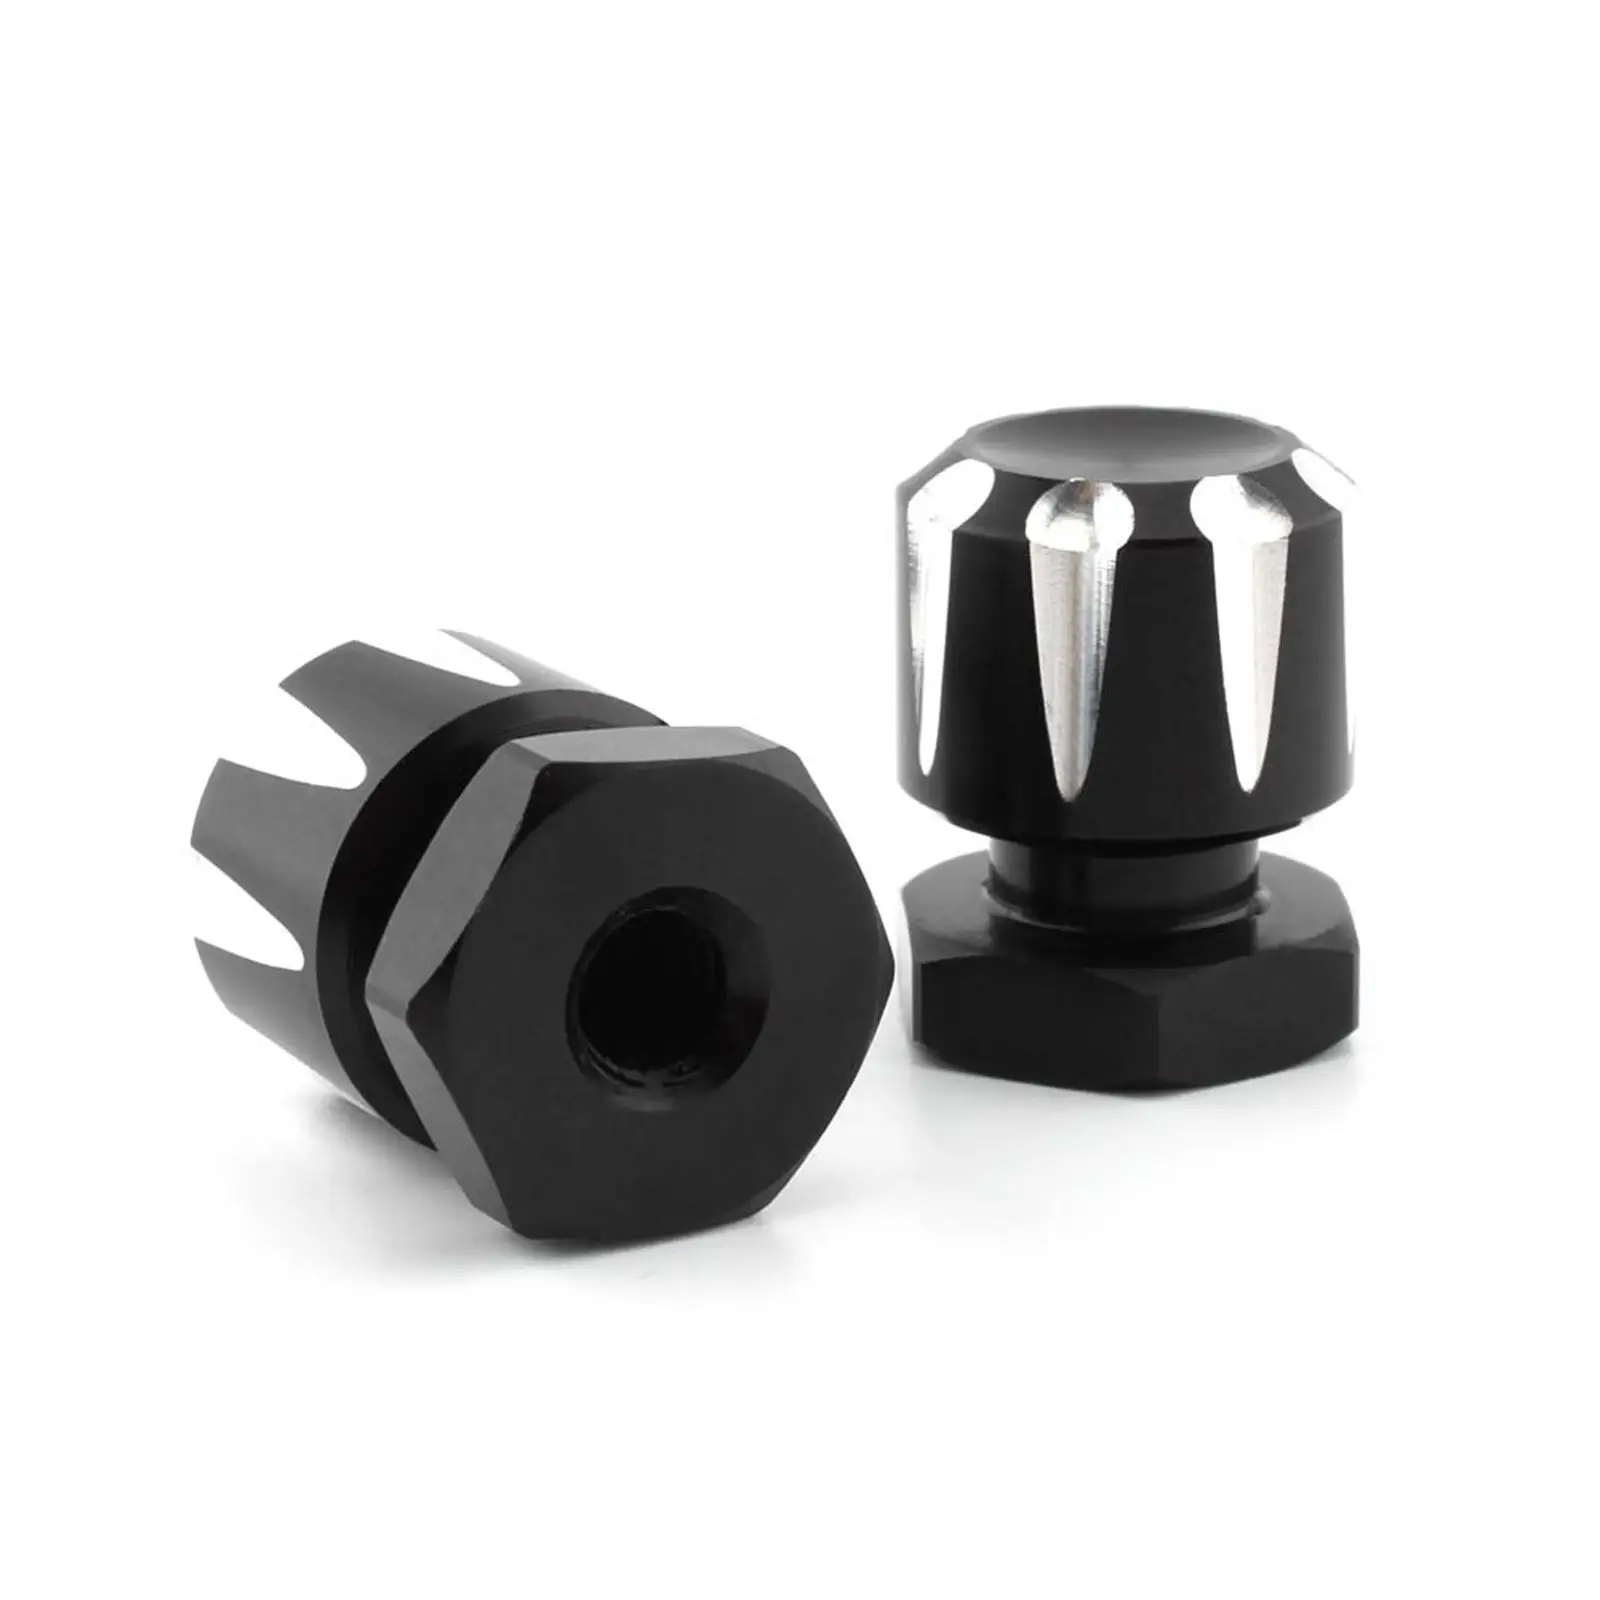 Solo Mounting Nuts Bolts 78032 Seat Mount Nuts Solo Mounting Nuts Fit for Cvo Breakout Fxsbse Professional Easy to Install